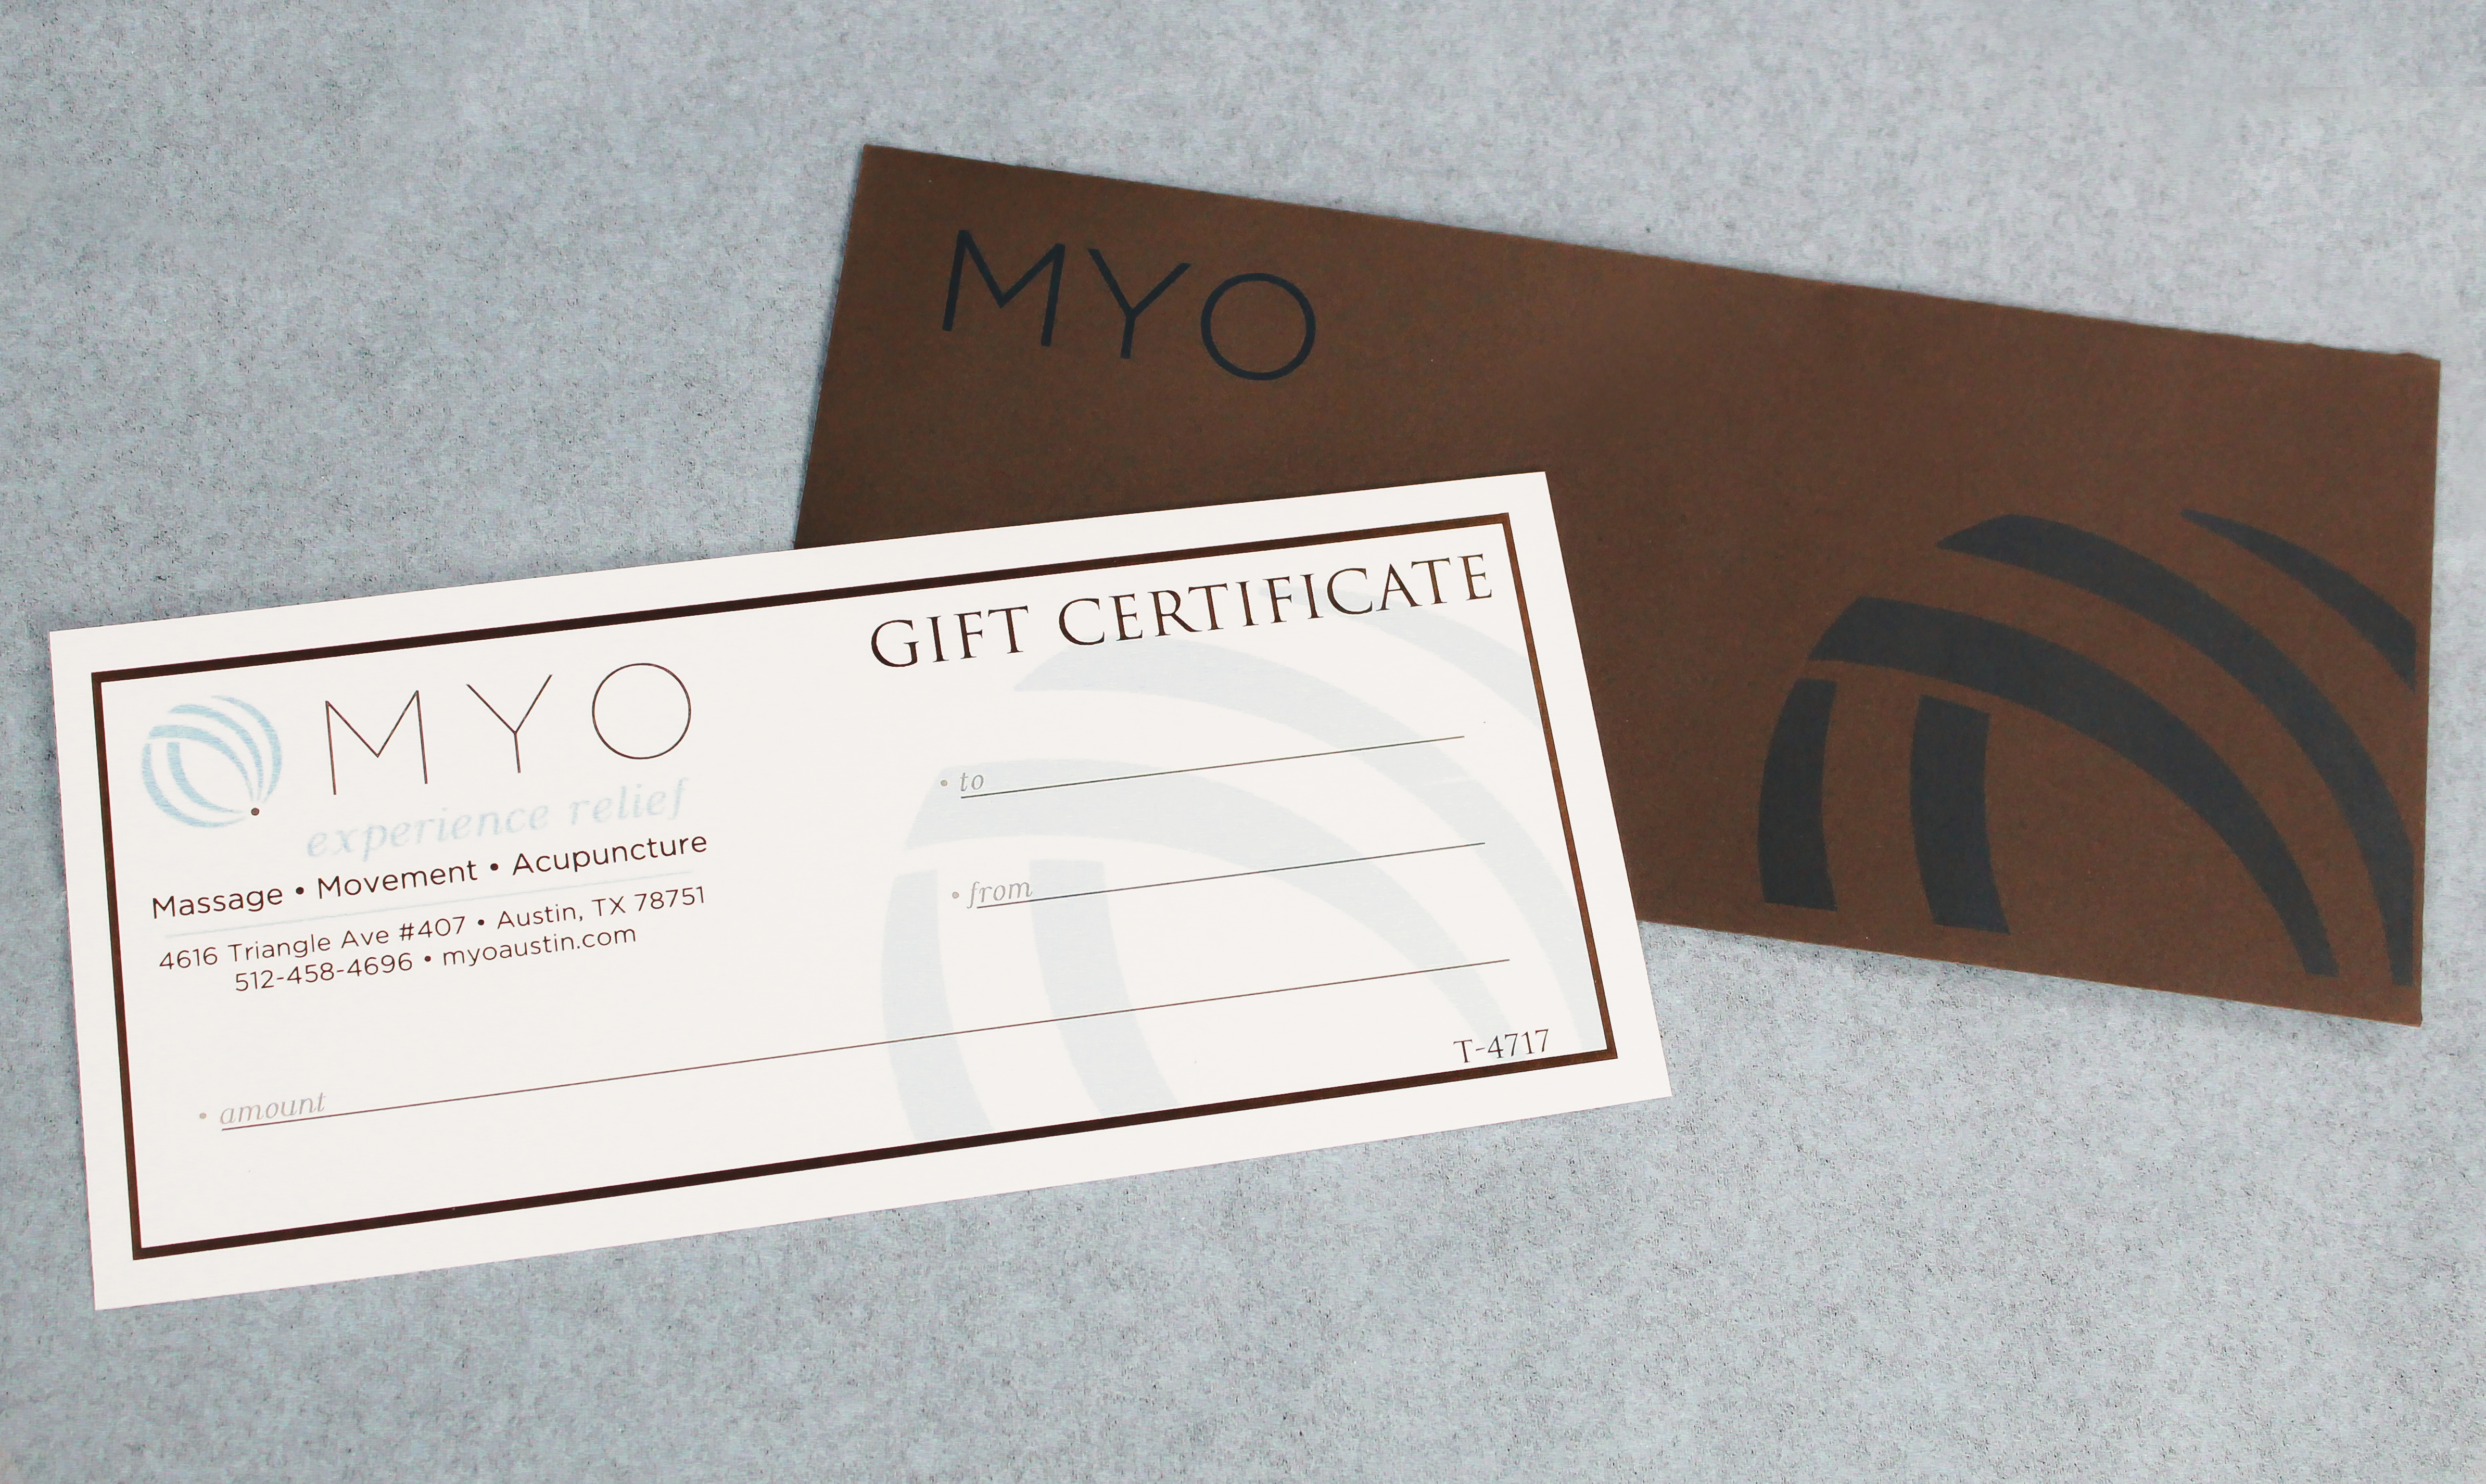 Customize a massage gift card by selecting a package or special service.